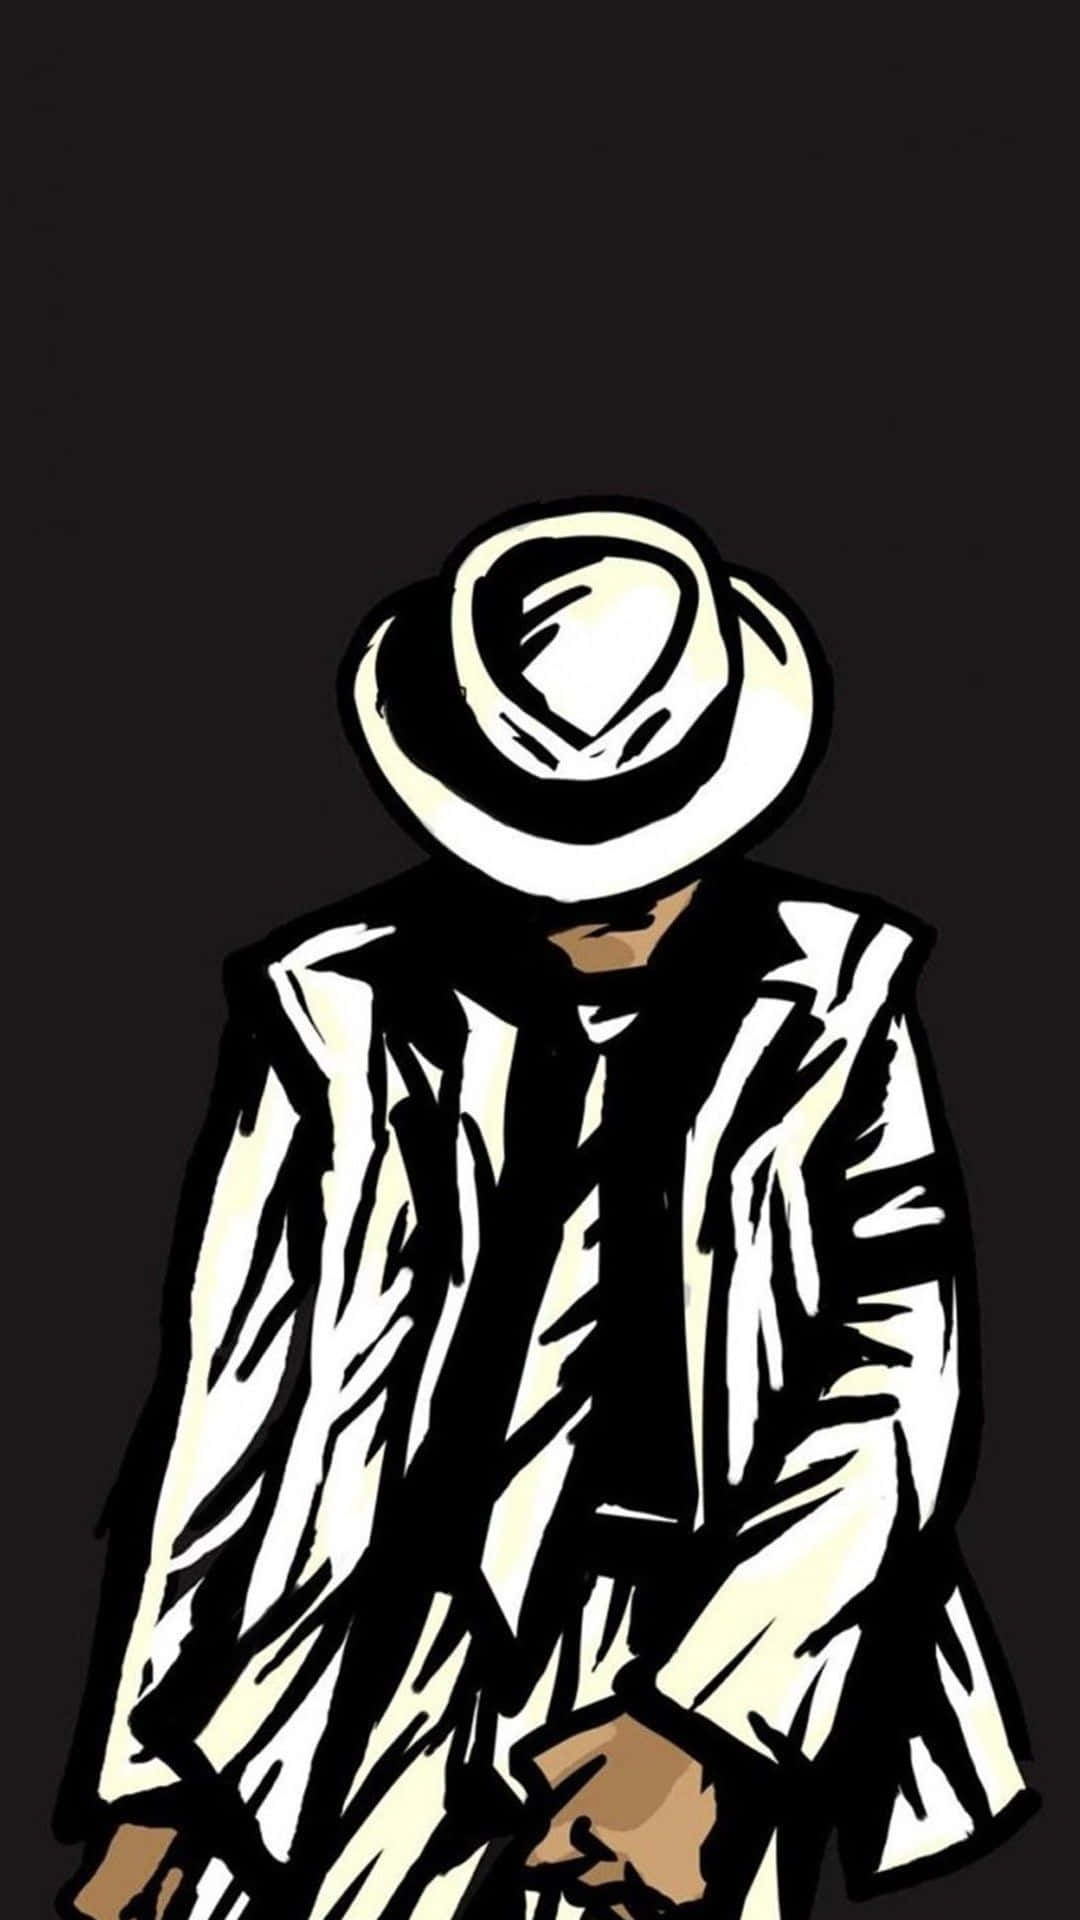 Enjoy the legacy of Michael Jackson on your iPhone! Wallpaper